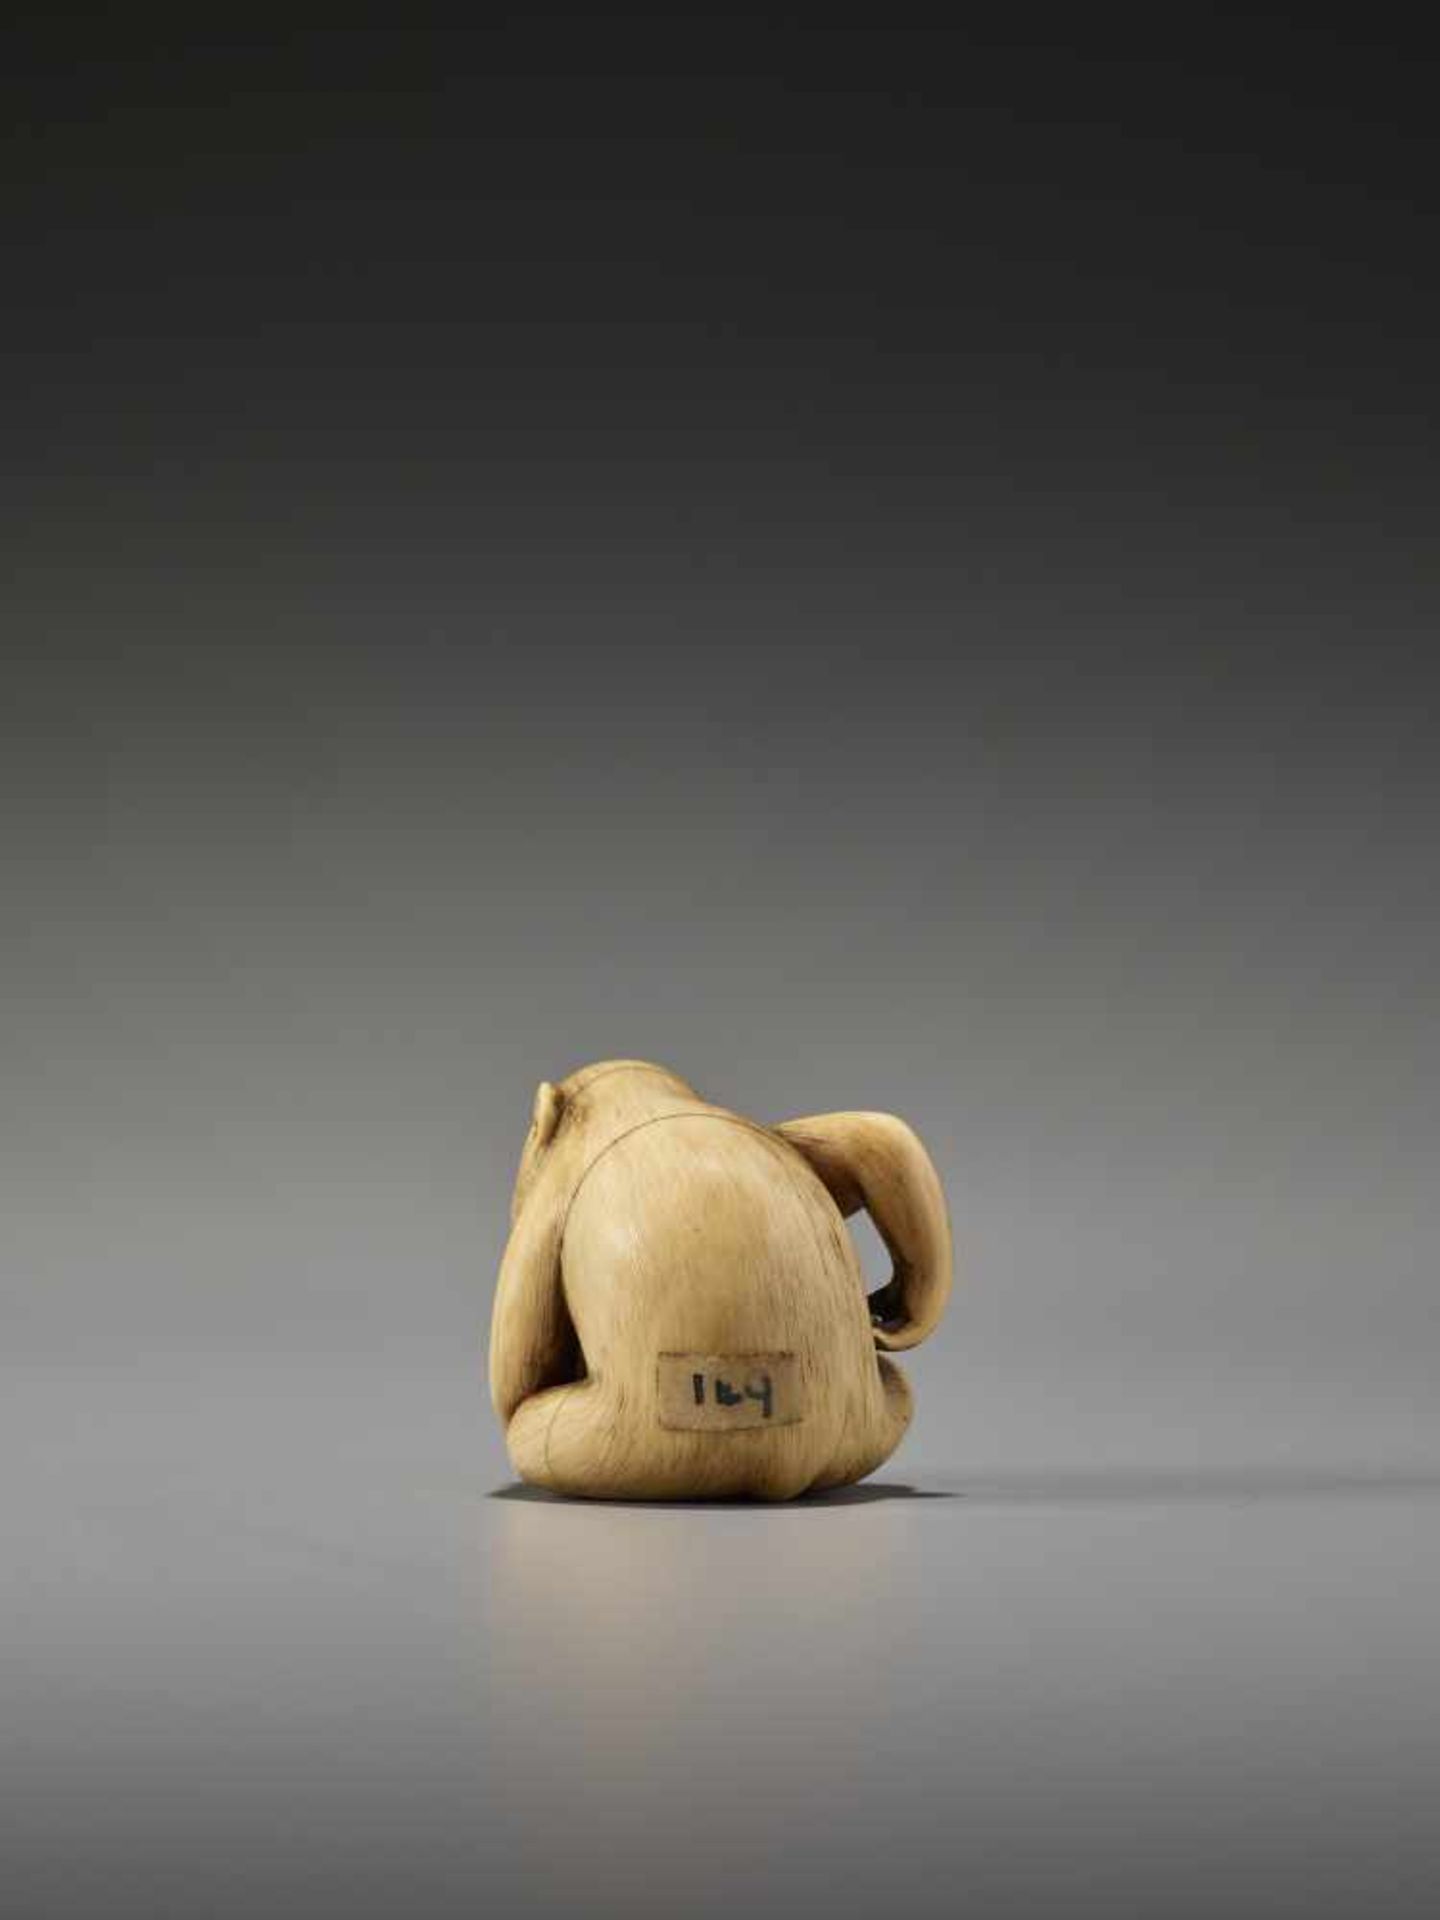 AN EXCELLENT IVORY NETSUKE OF A MONKEY EATING A PEACH BY RANTEIBy Rantei, ivory netsukeJapan, Kyoto, - Image 5 of 13